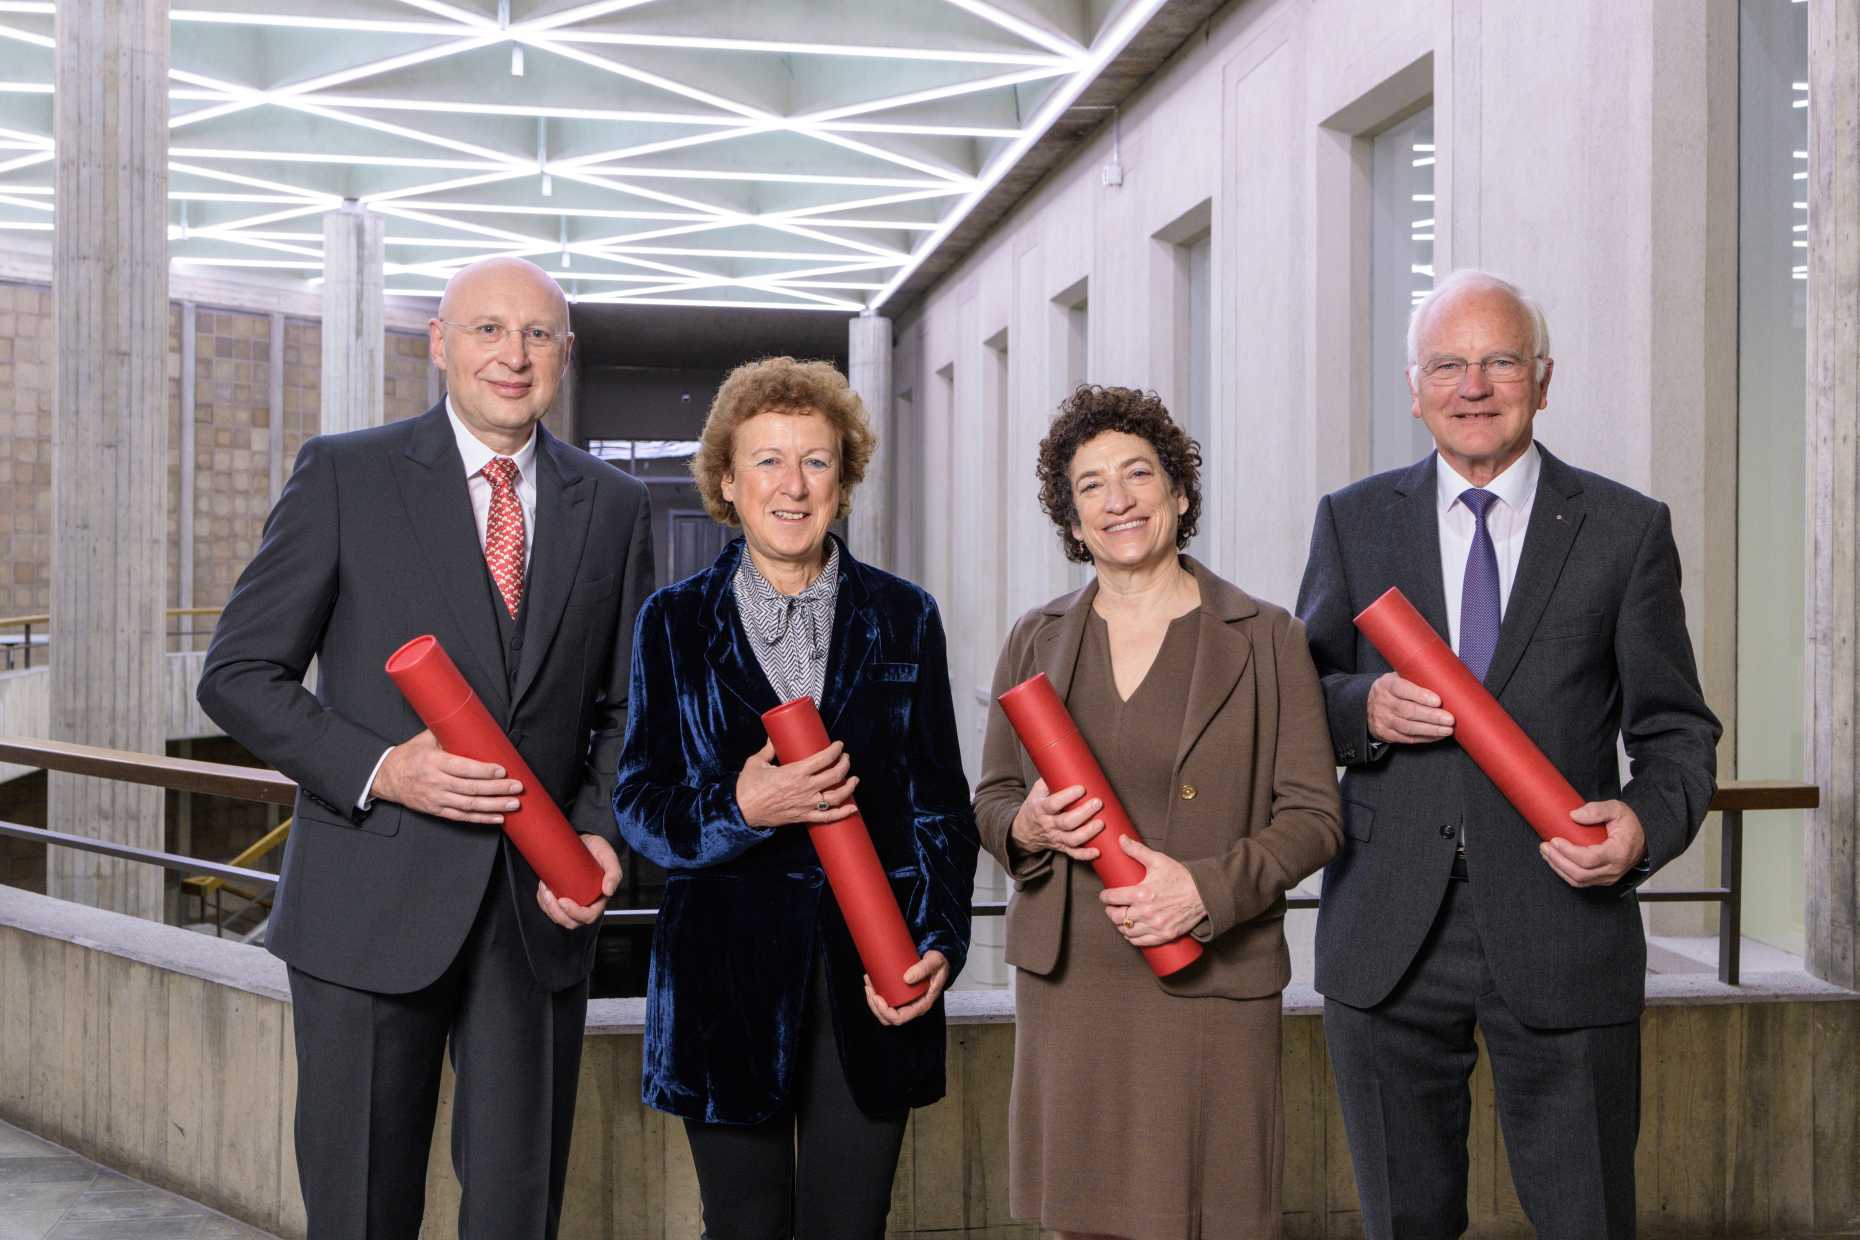 Honorary doctors Prof. Dr. Dr. h.c. mult. Stefan W. Hell, Prof. Dr. Lia Addadi and Prof. Dr. Naomi Oreskes and honorary council Prof. Dr. Hengartner (v.l.n.r.). (Image: ETH Zurich / Oliver Bartenschlager)